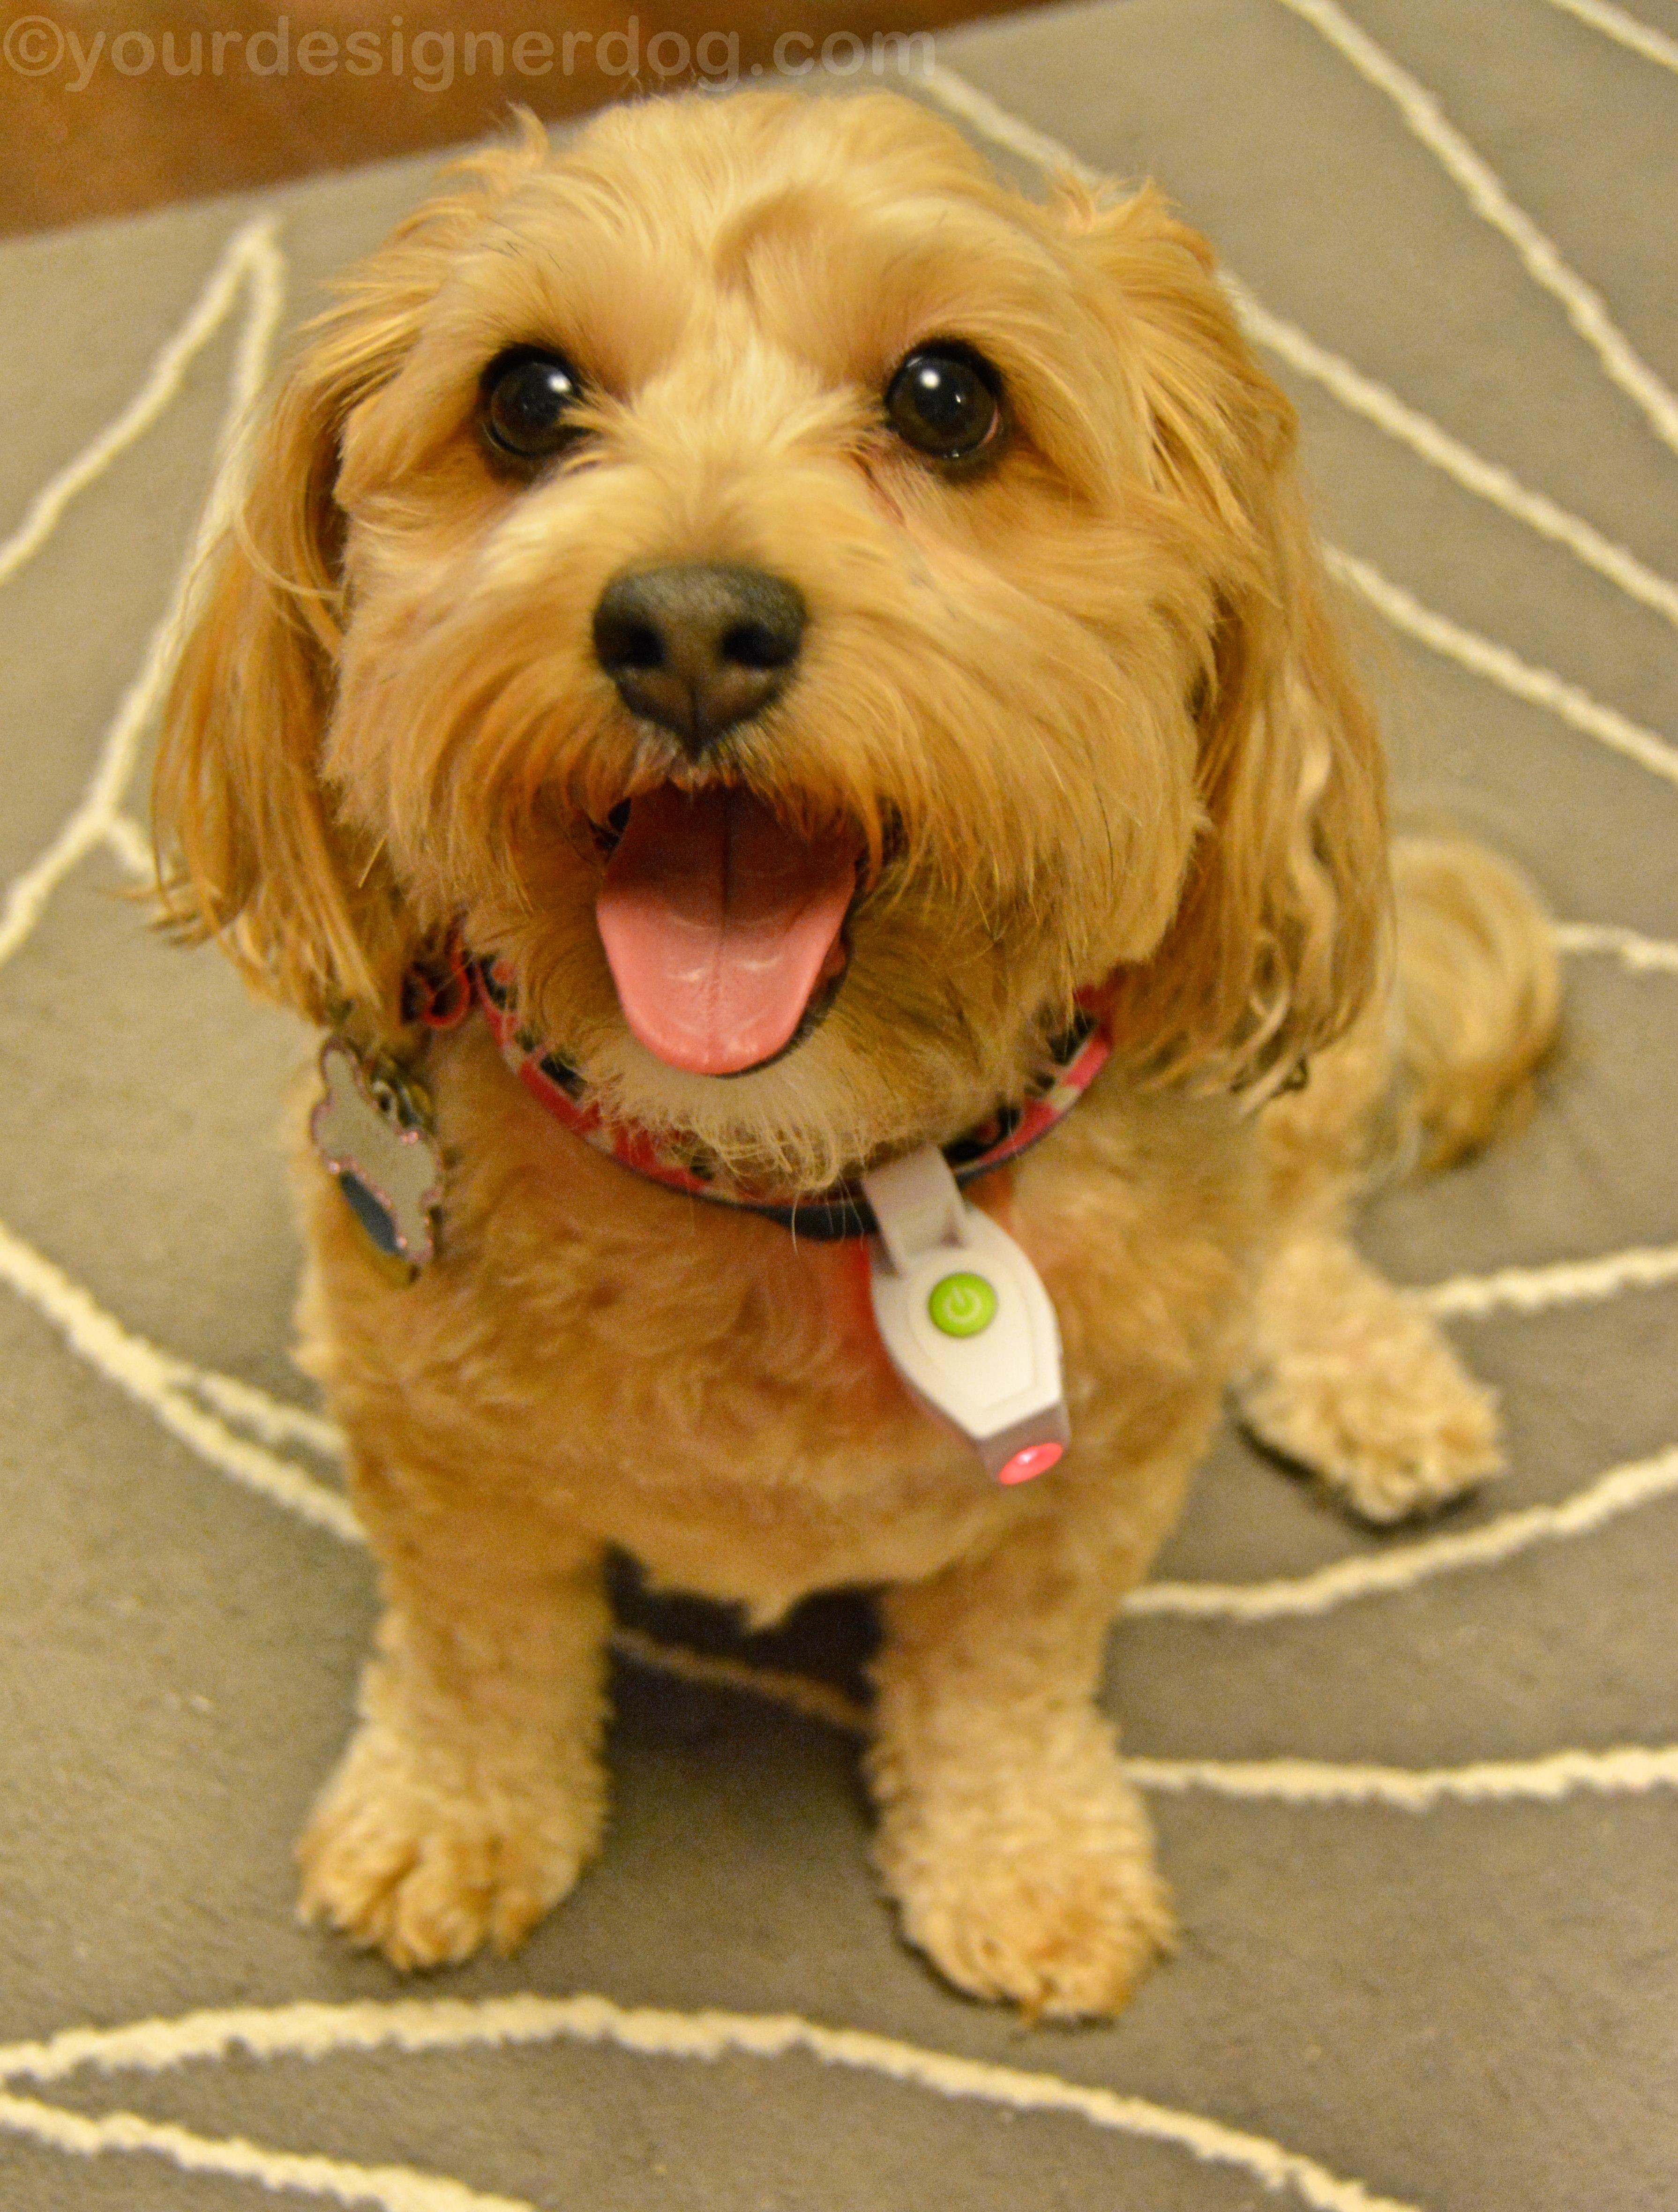 dogs, designer dogs, yorkipoo, yorkie poo, laser light, technology, tongue out